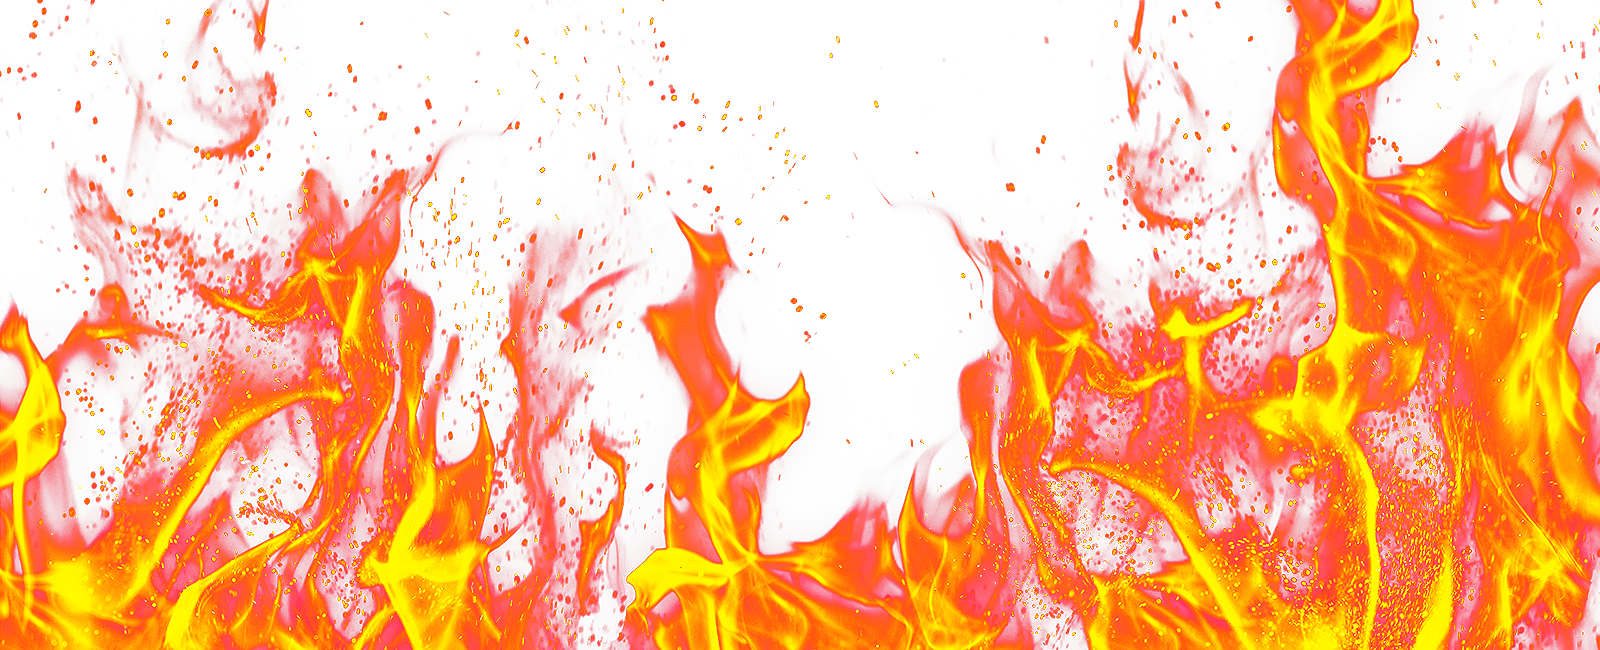 Fire Flames Png - Fire Png Image, Transparent background PNG HD thumbnail